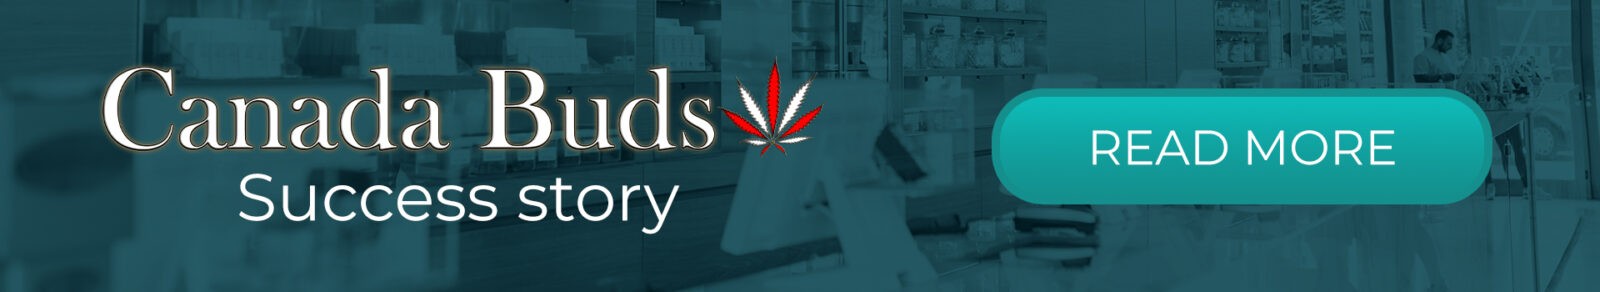 canada-buds-success-story-read-more-banner